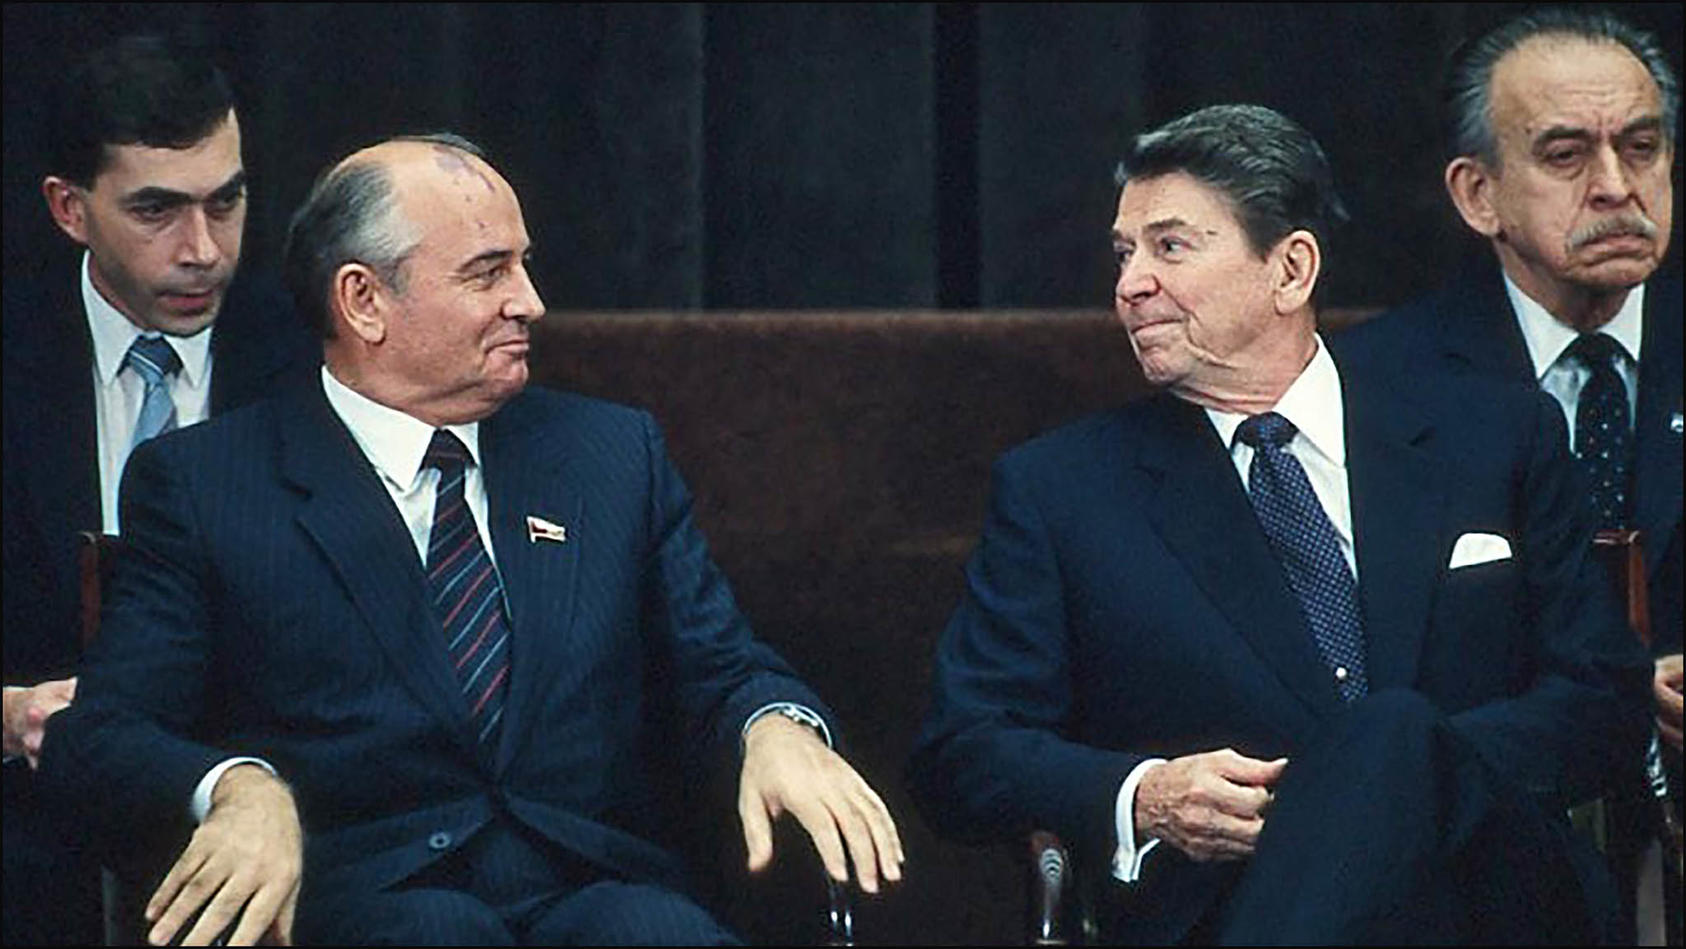 Mikhail Gorbachev and Ronald Reagan exchange glances after their first meetings over two days in Geneva in 1985. Gorbachev’s establishment of personal relations with Western leaders was vital in ending the Cold War. (The White House/Bill Fitz-Patrick)